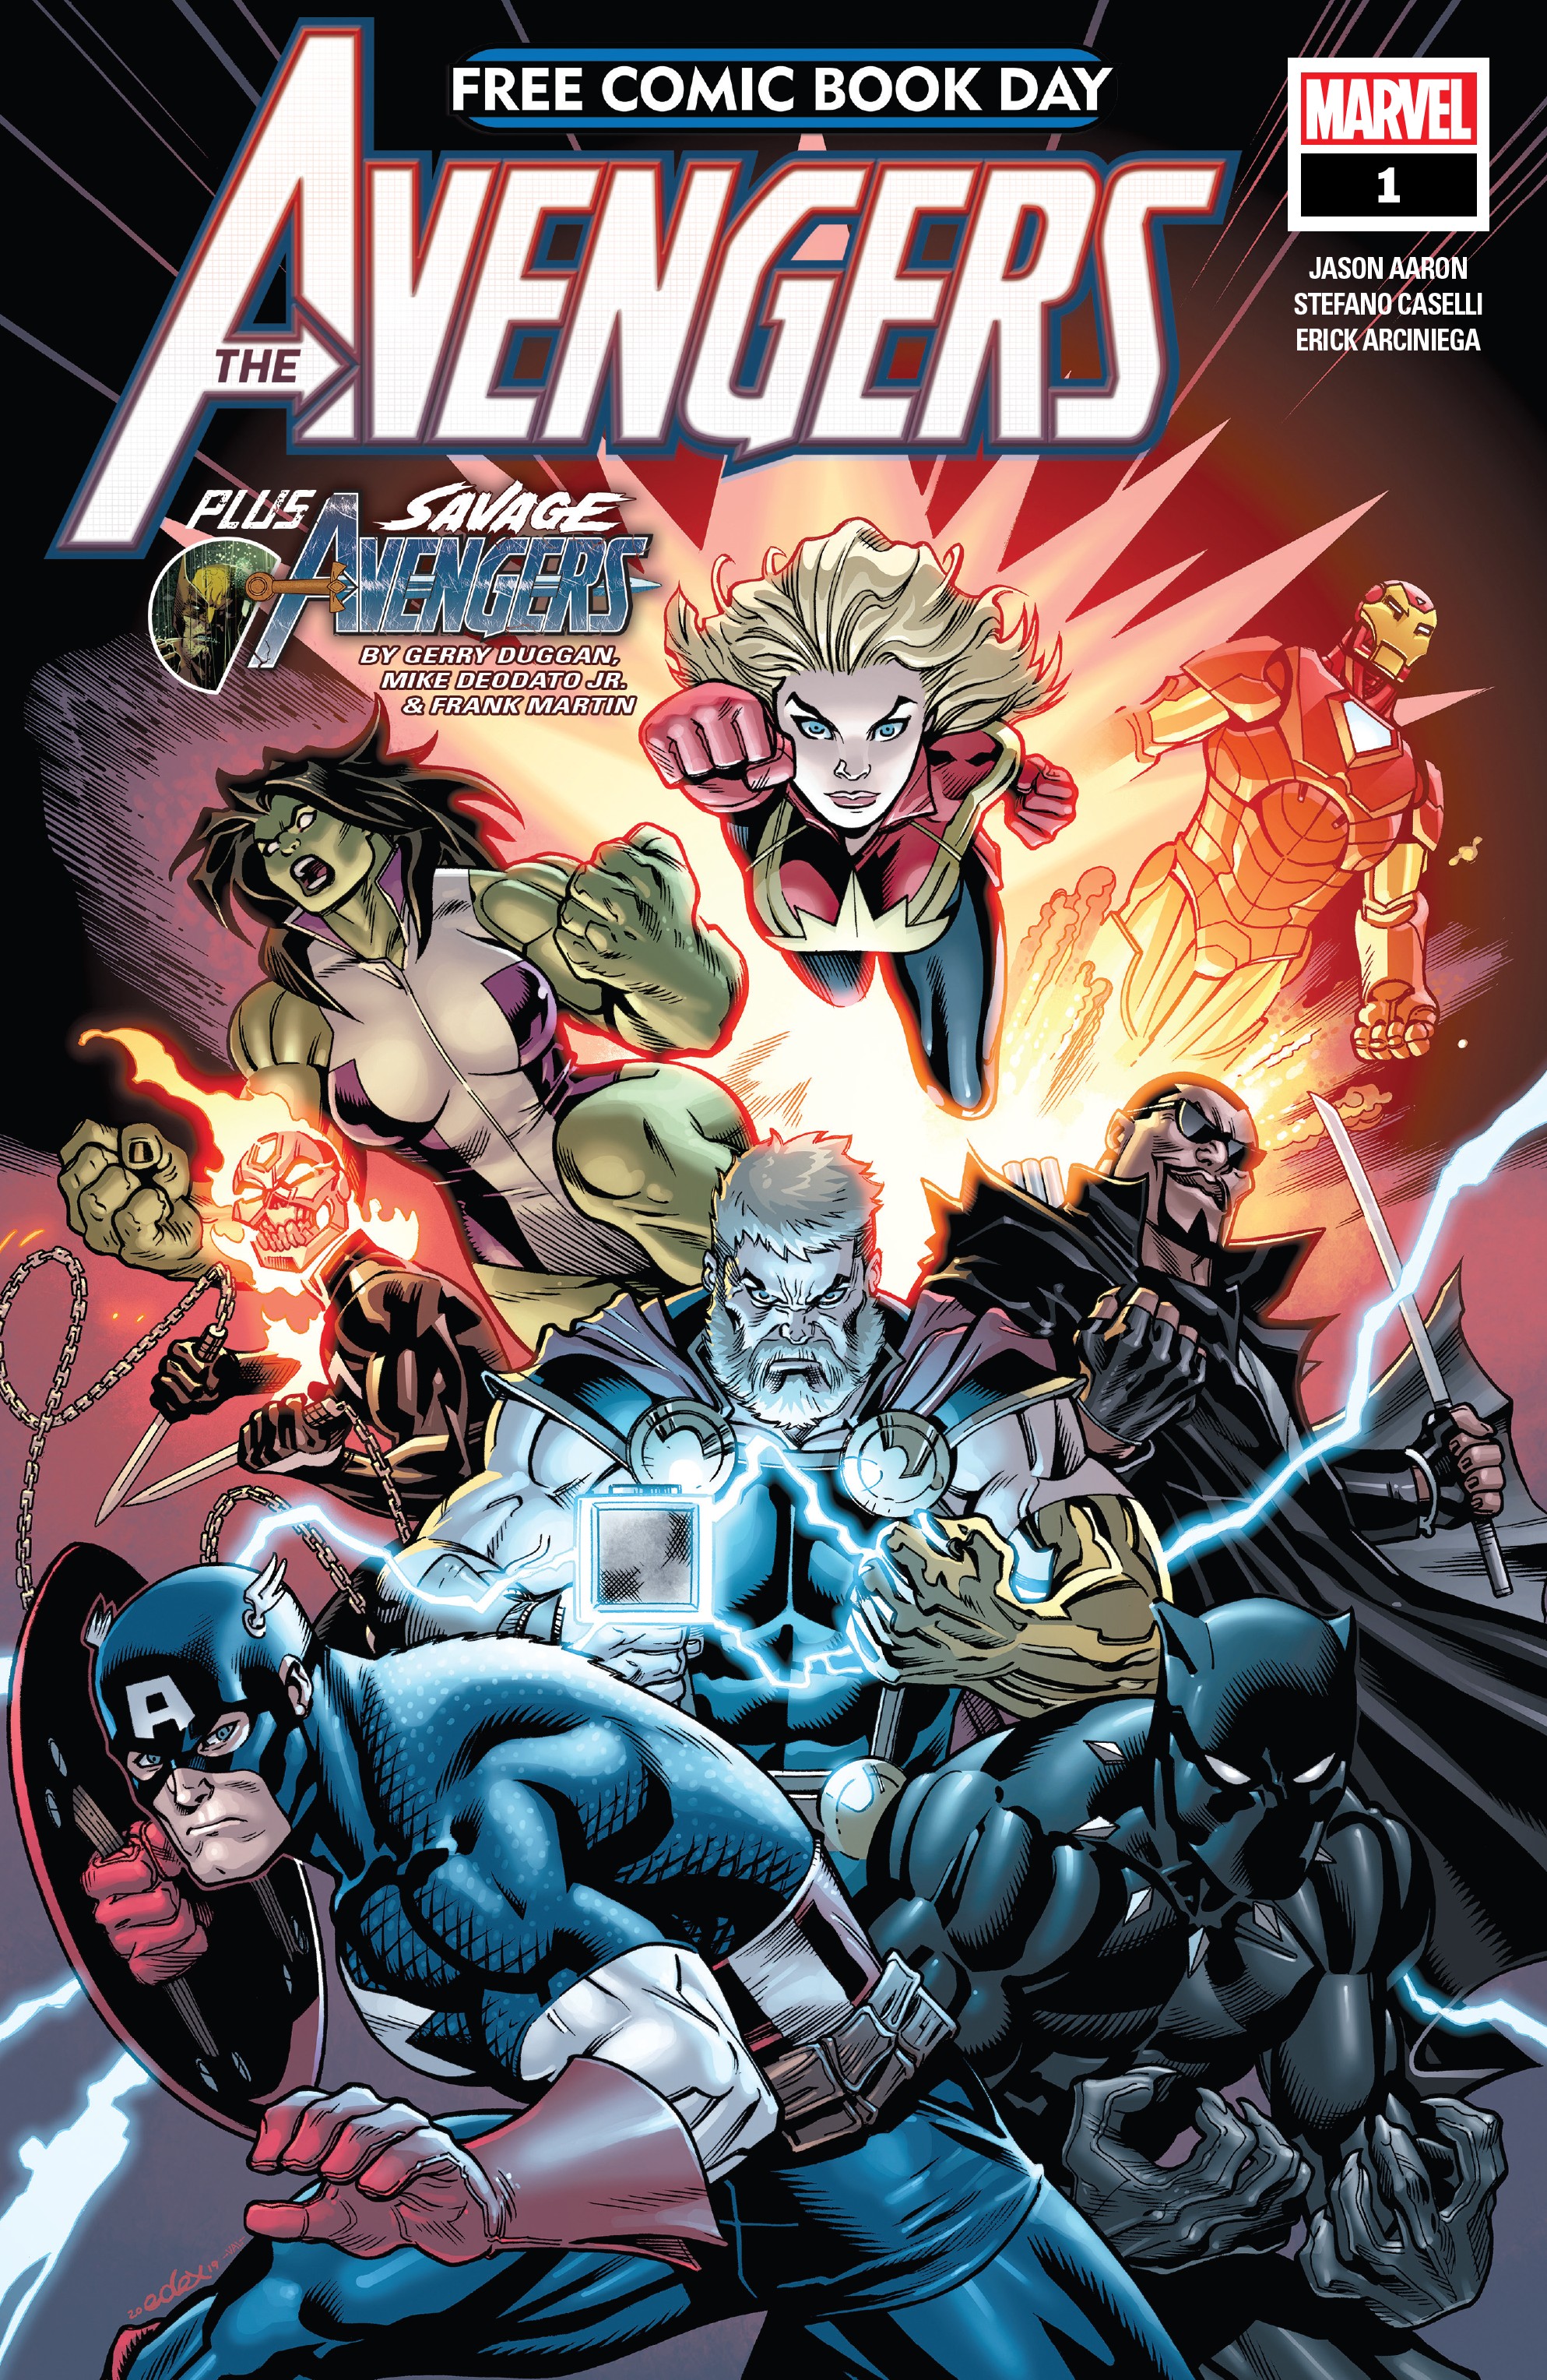 Read online Free Comic Book Day 2019 comic -  Issue # Avengers-Savage Avengers - 1